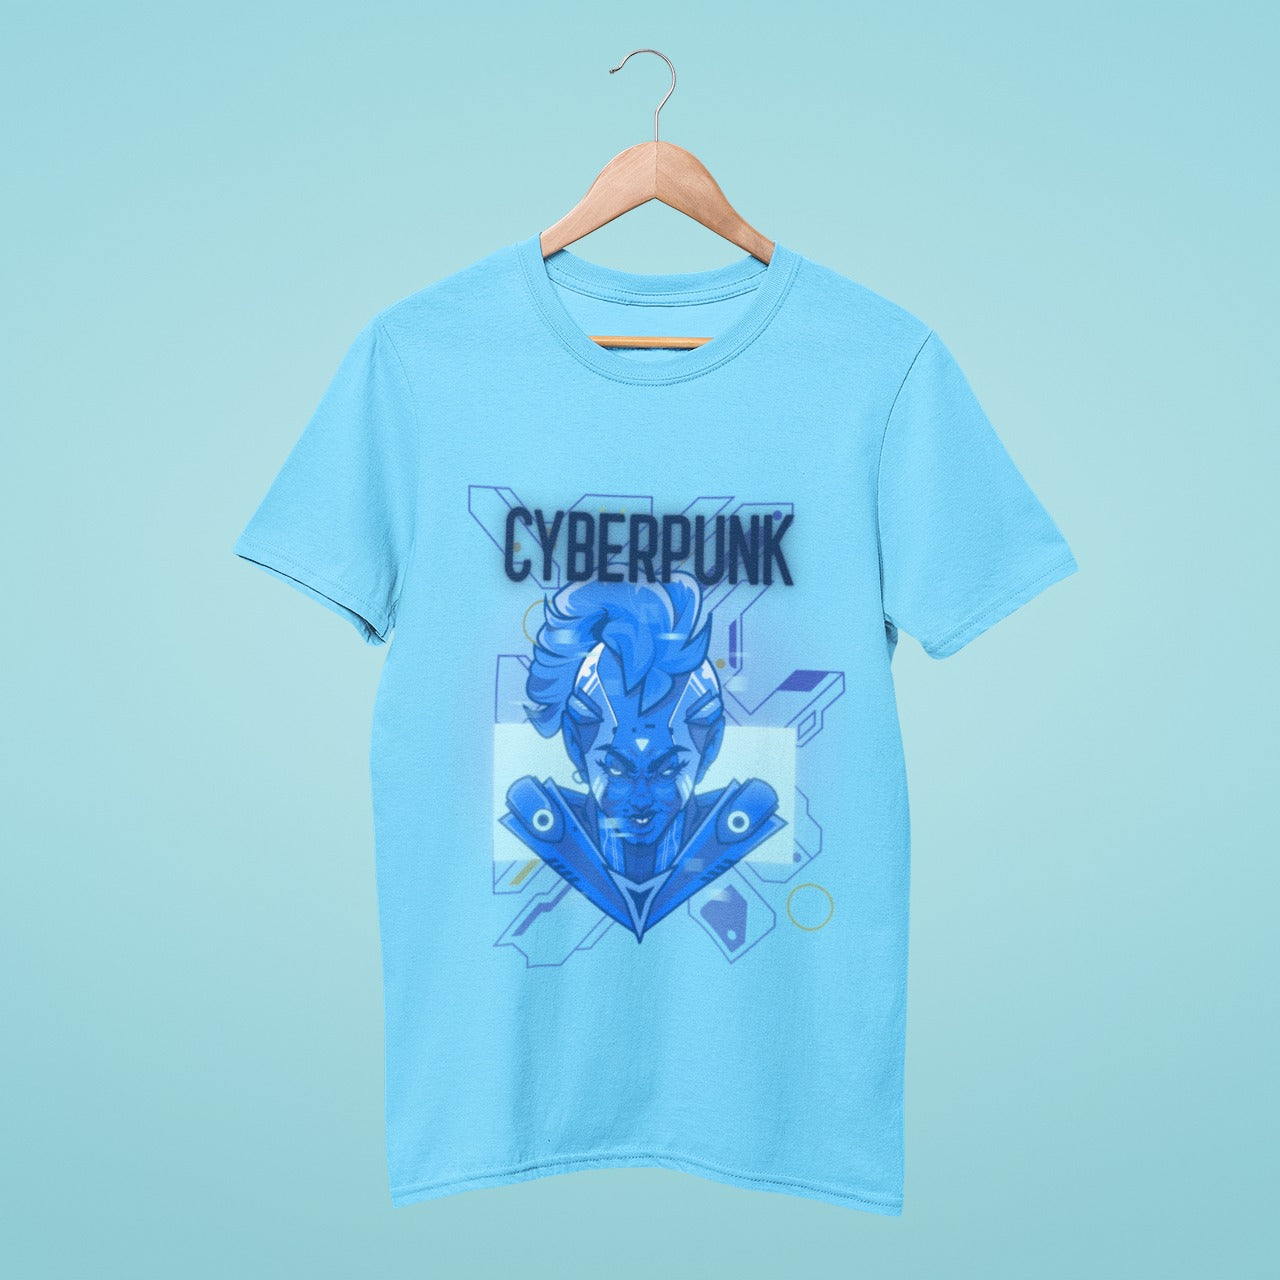 "Cyberpunk" title with a futuristic face design. Get this blue t-shirt to express your love for cyber-themed fashion and technology-inspired clothing.